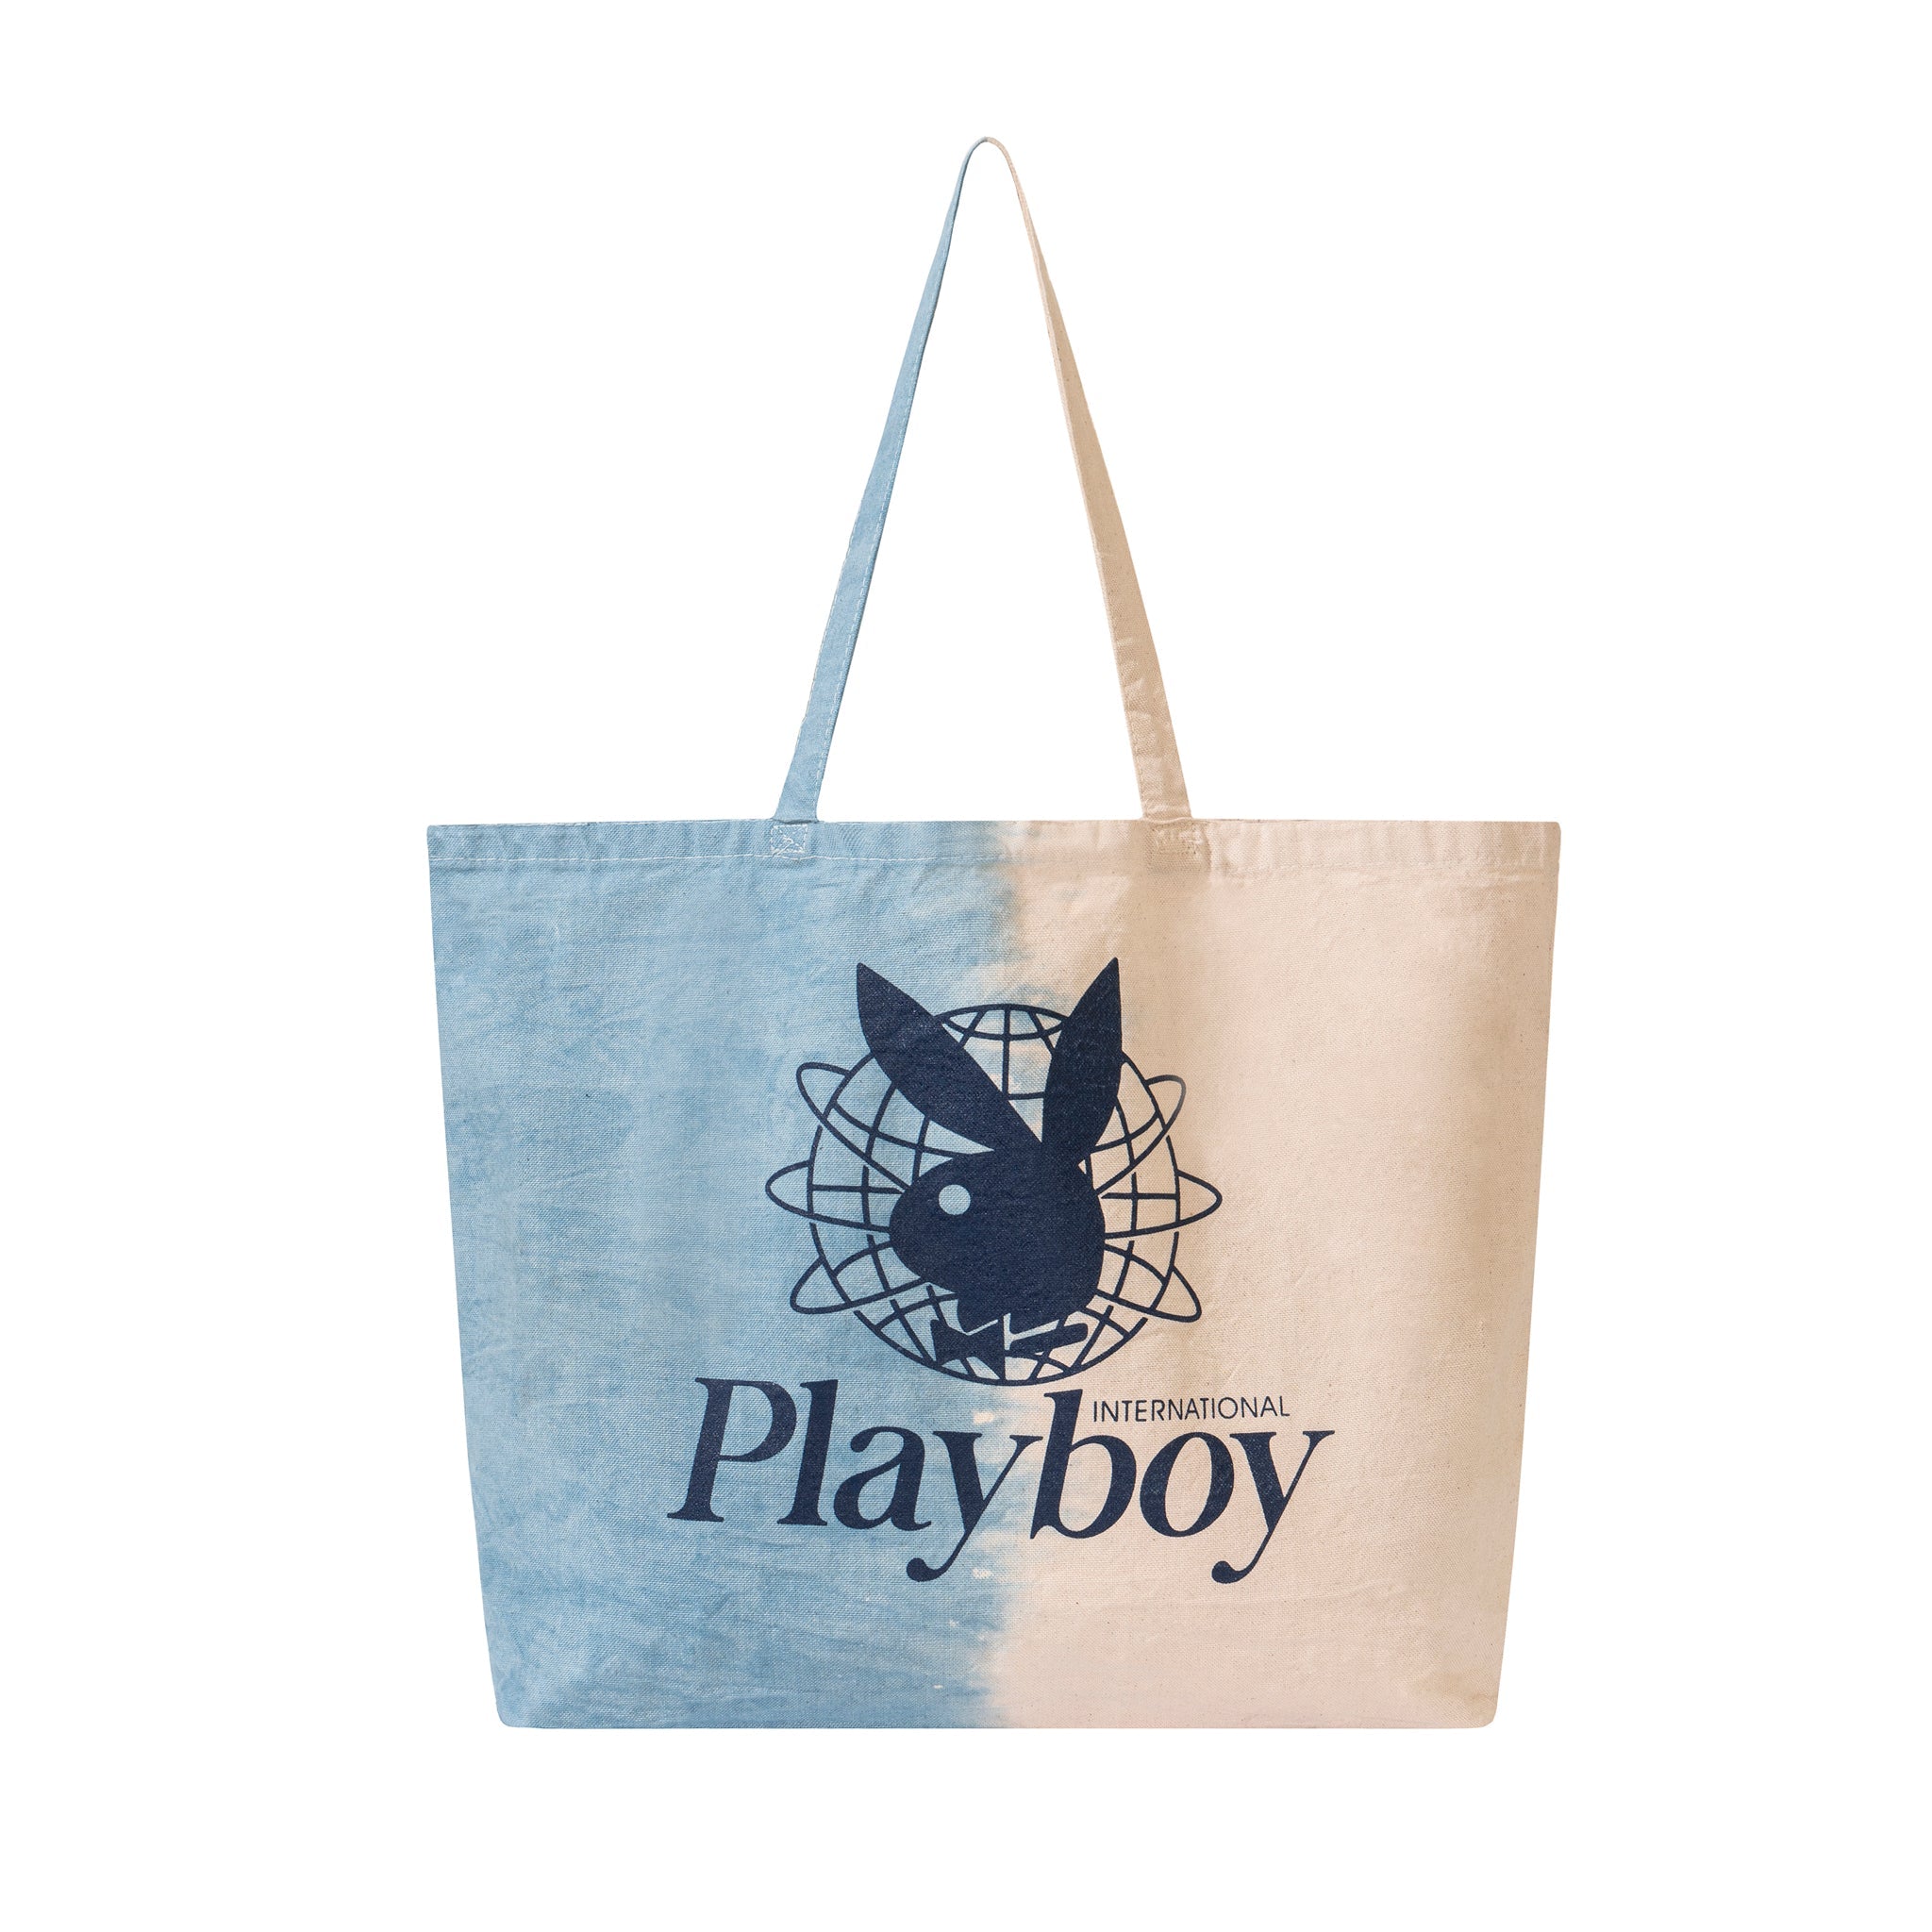 Unisex Bags Women\'s Official and | Accessories Clutches Playboy